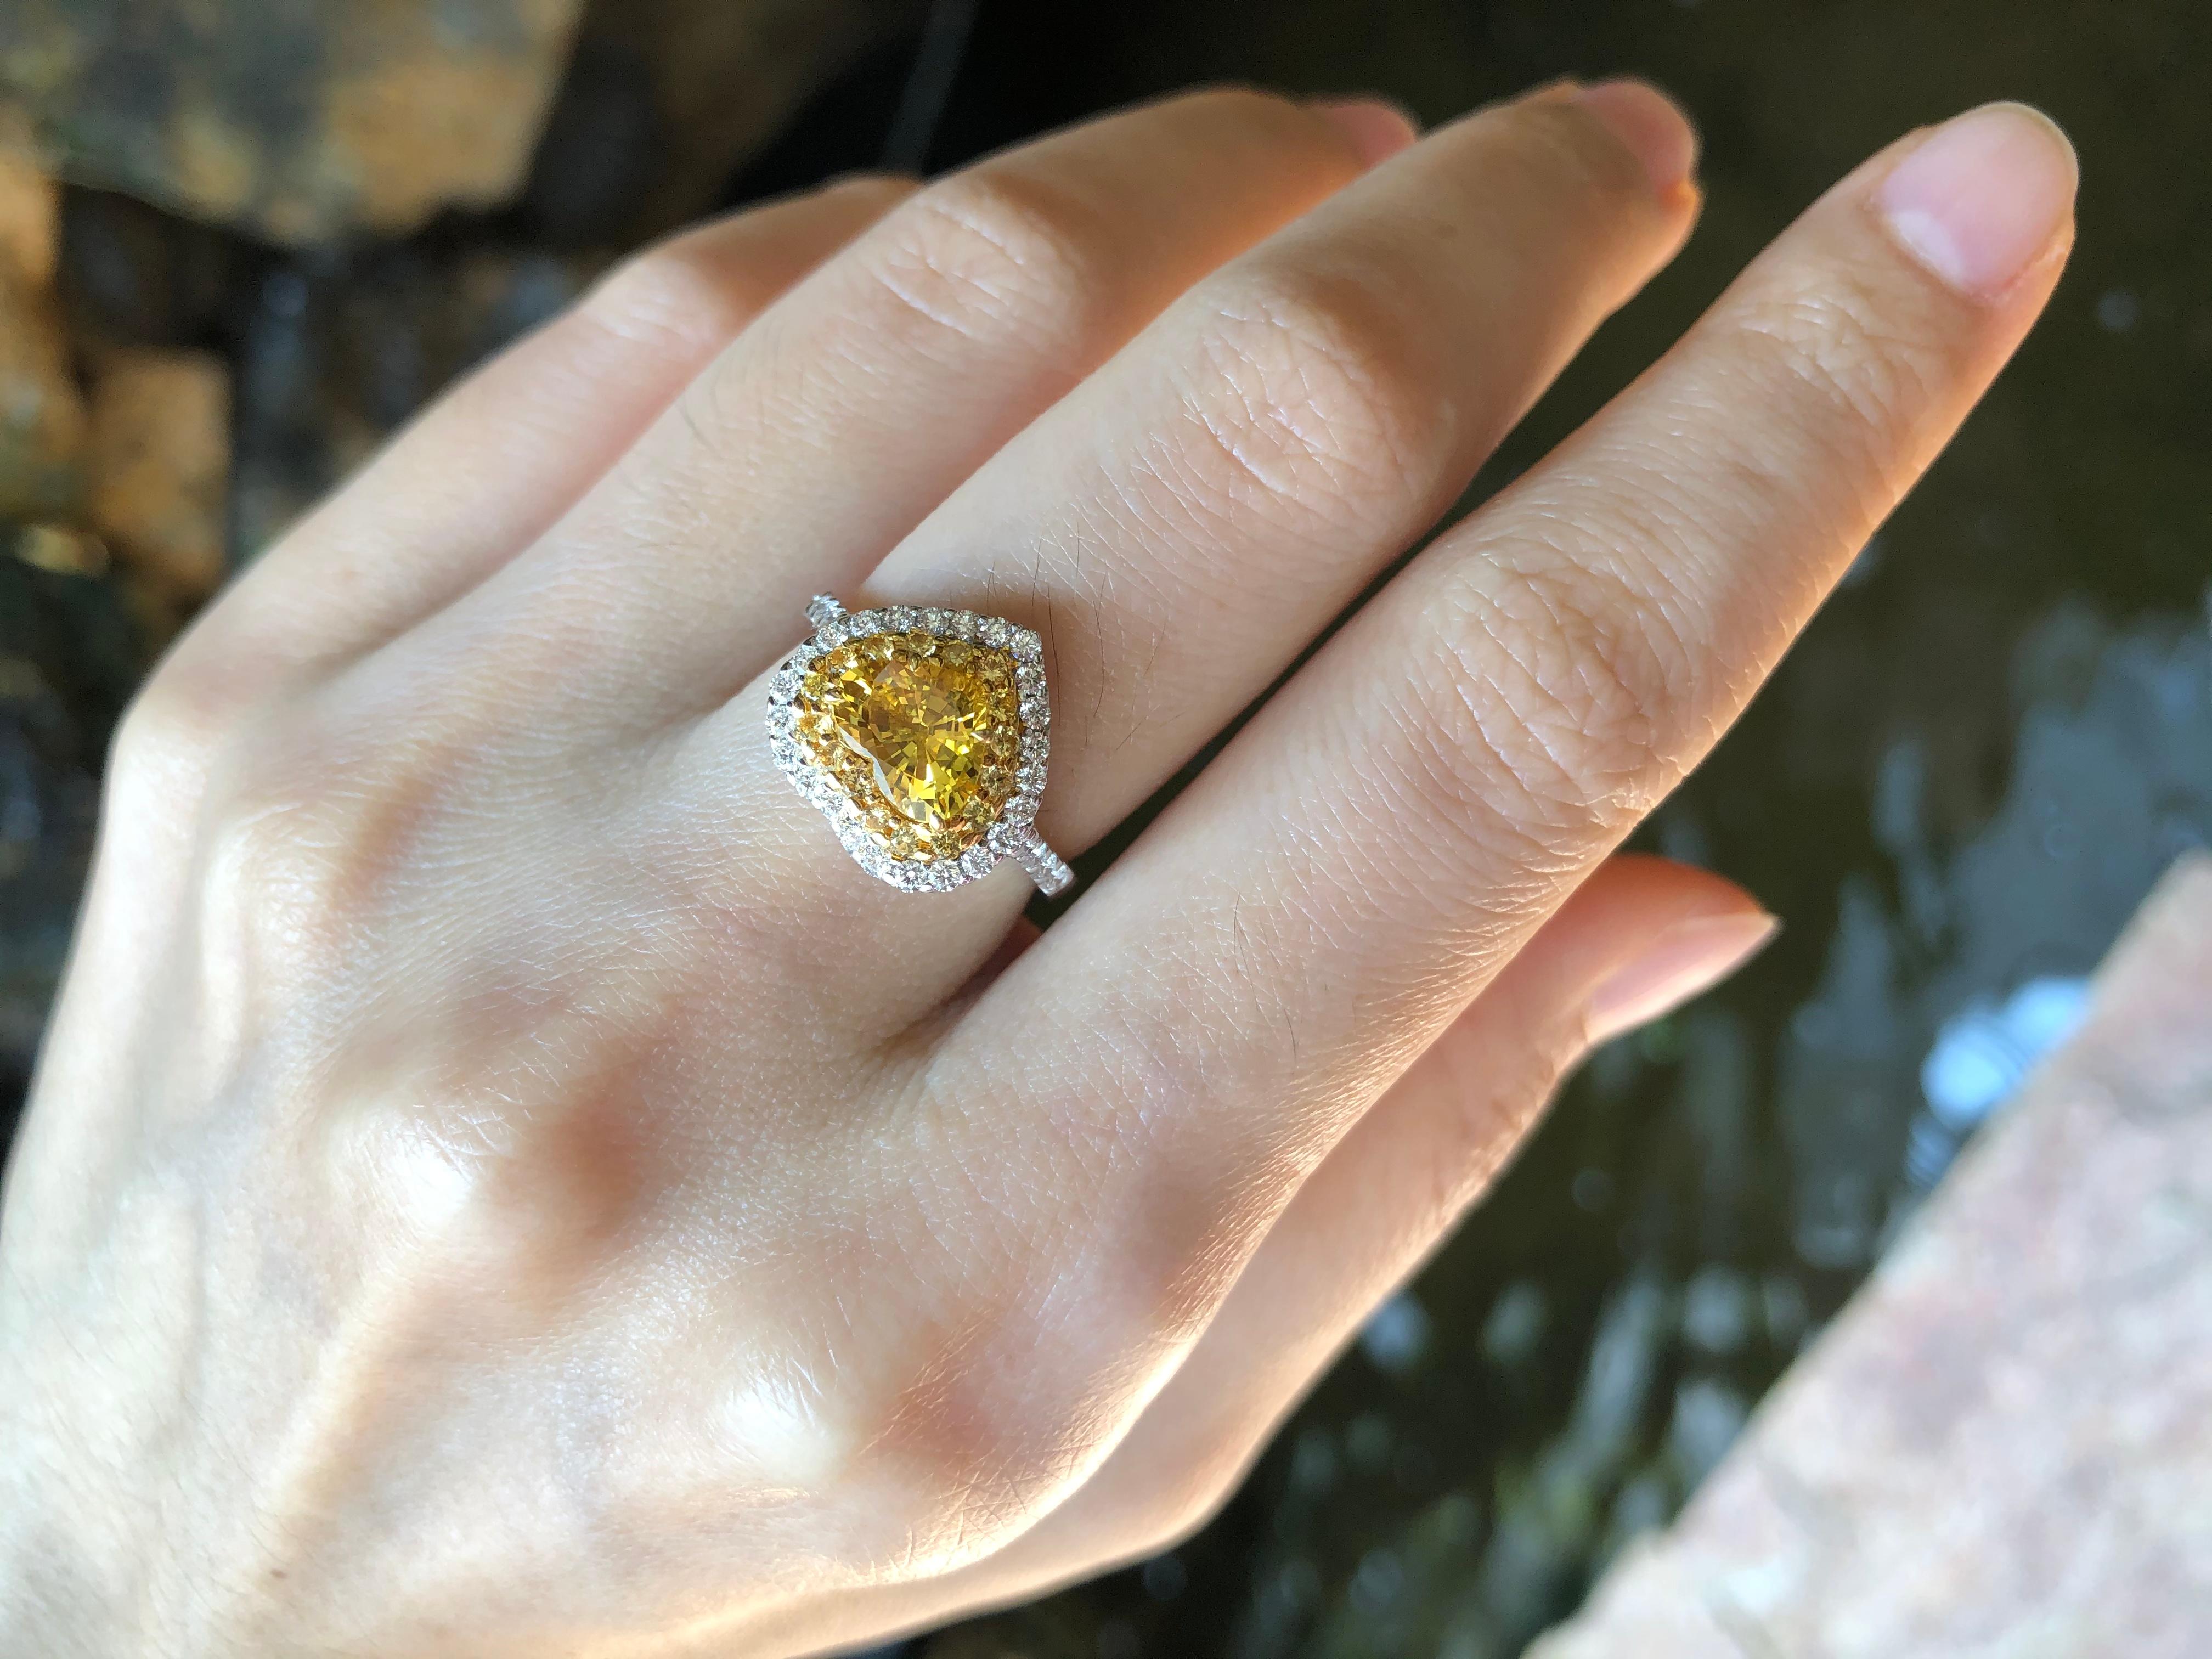 Yellow Sapphire 1.37 carats with Diamond 0.36 carat and Yellow Sapphire 0.21 carat Ring set in 18 Karat White Gold Settings

Width:  1.3 cm 
Length: 1.3 cm
Ring Size: 51
Total Weight: 4.03 grams

